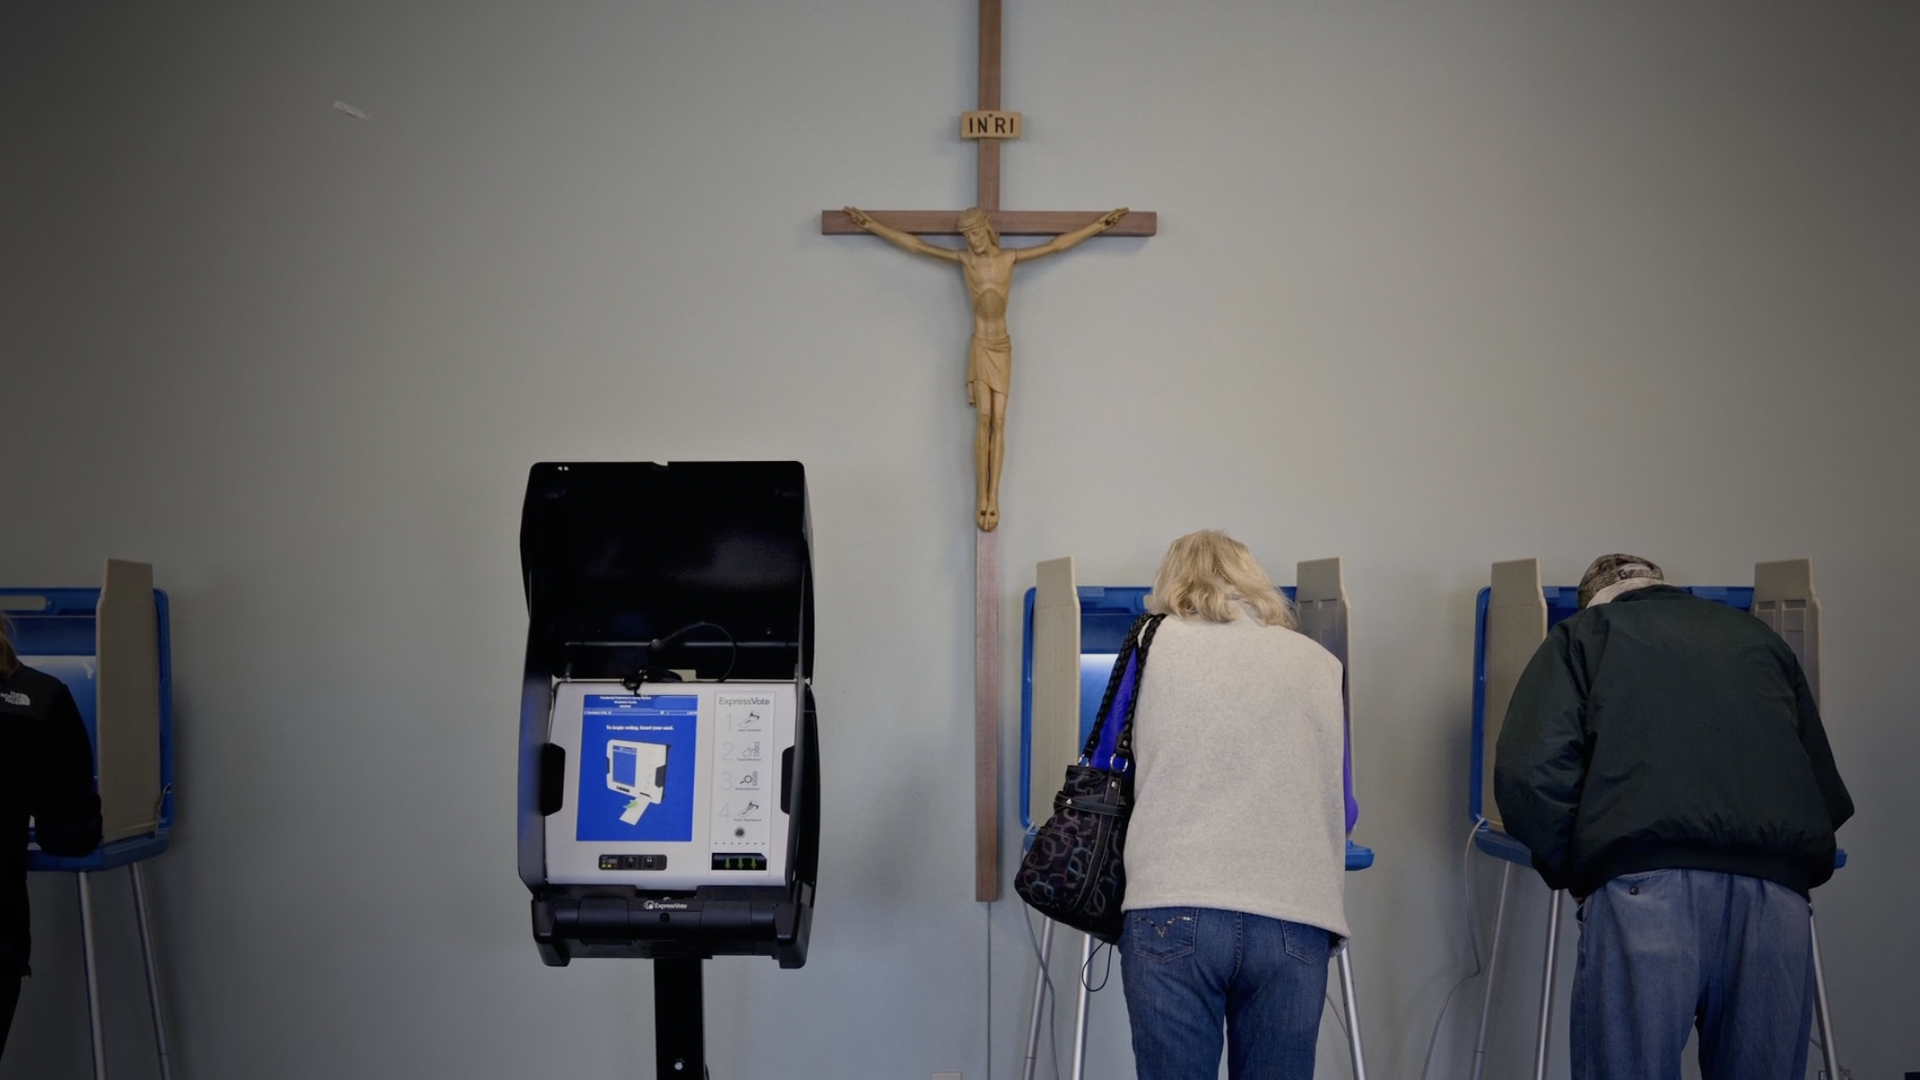 Voters cast ballots while a Cross on a wall towers over them.